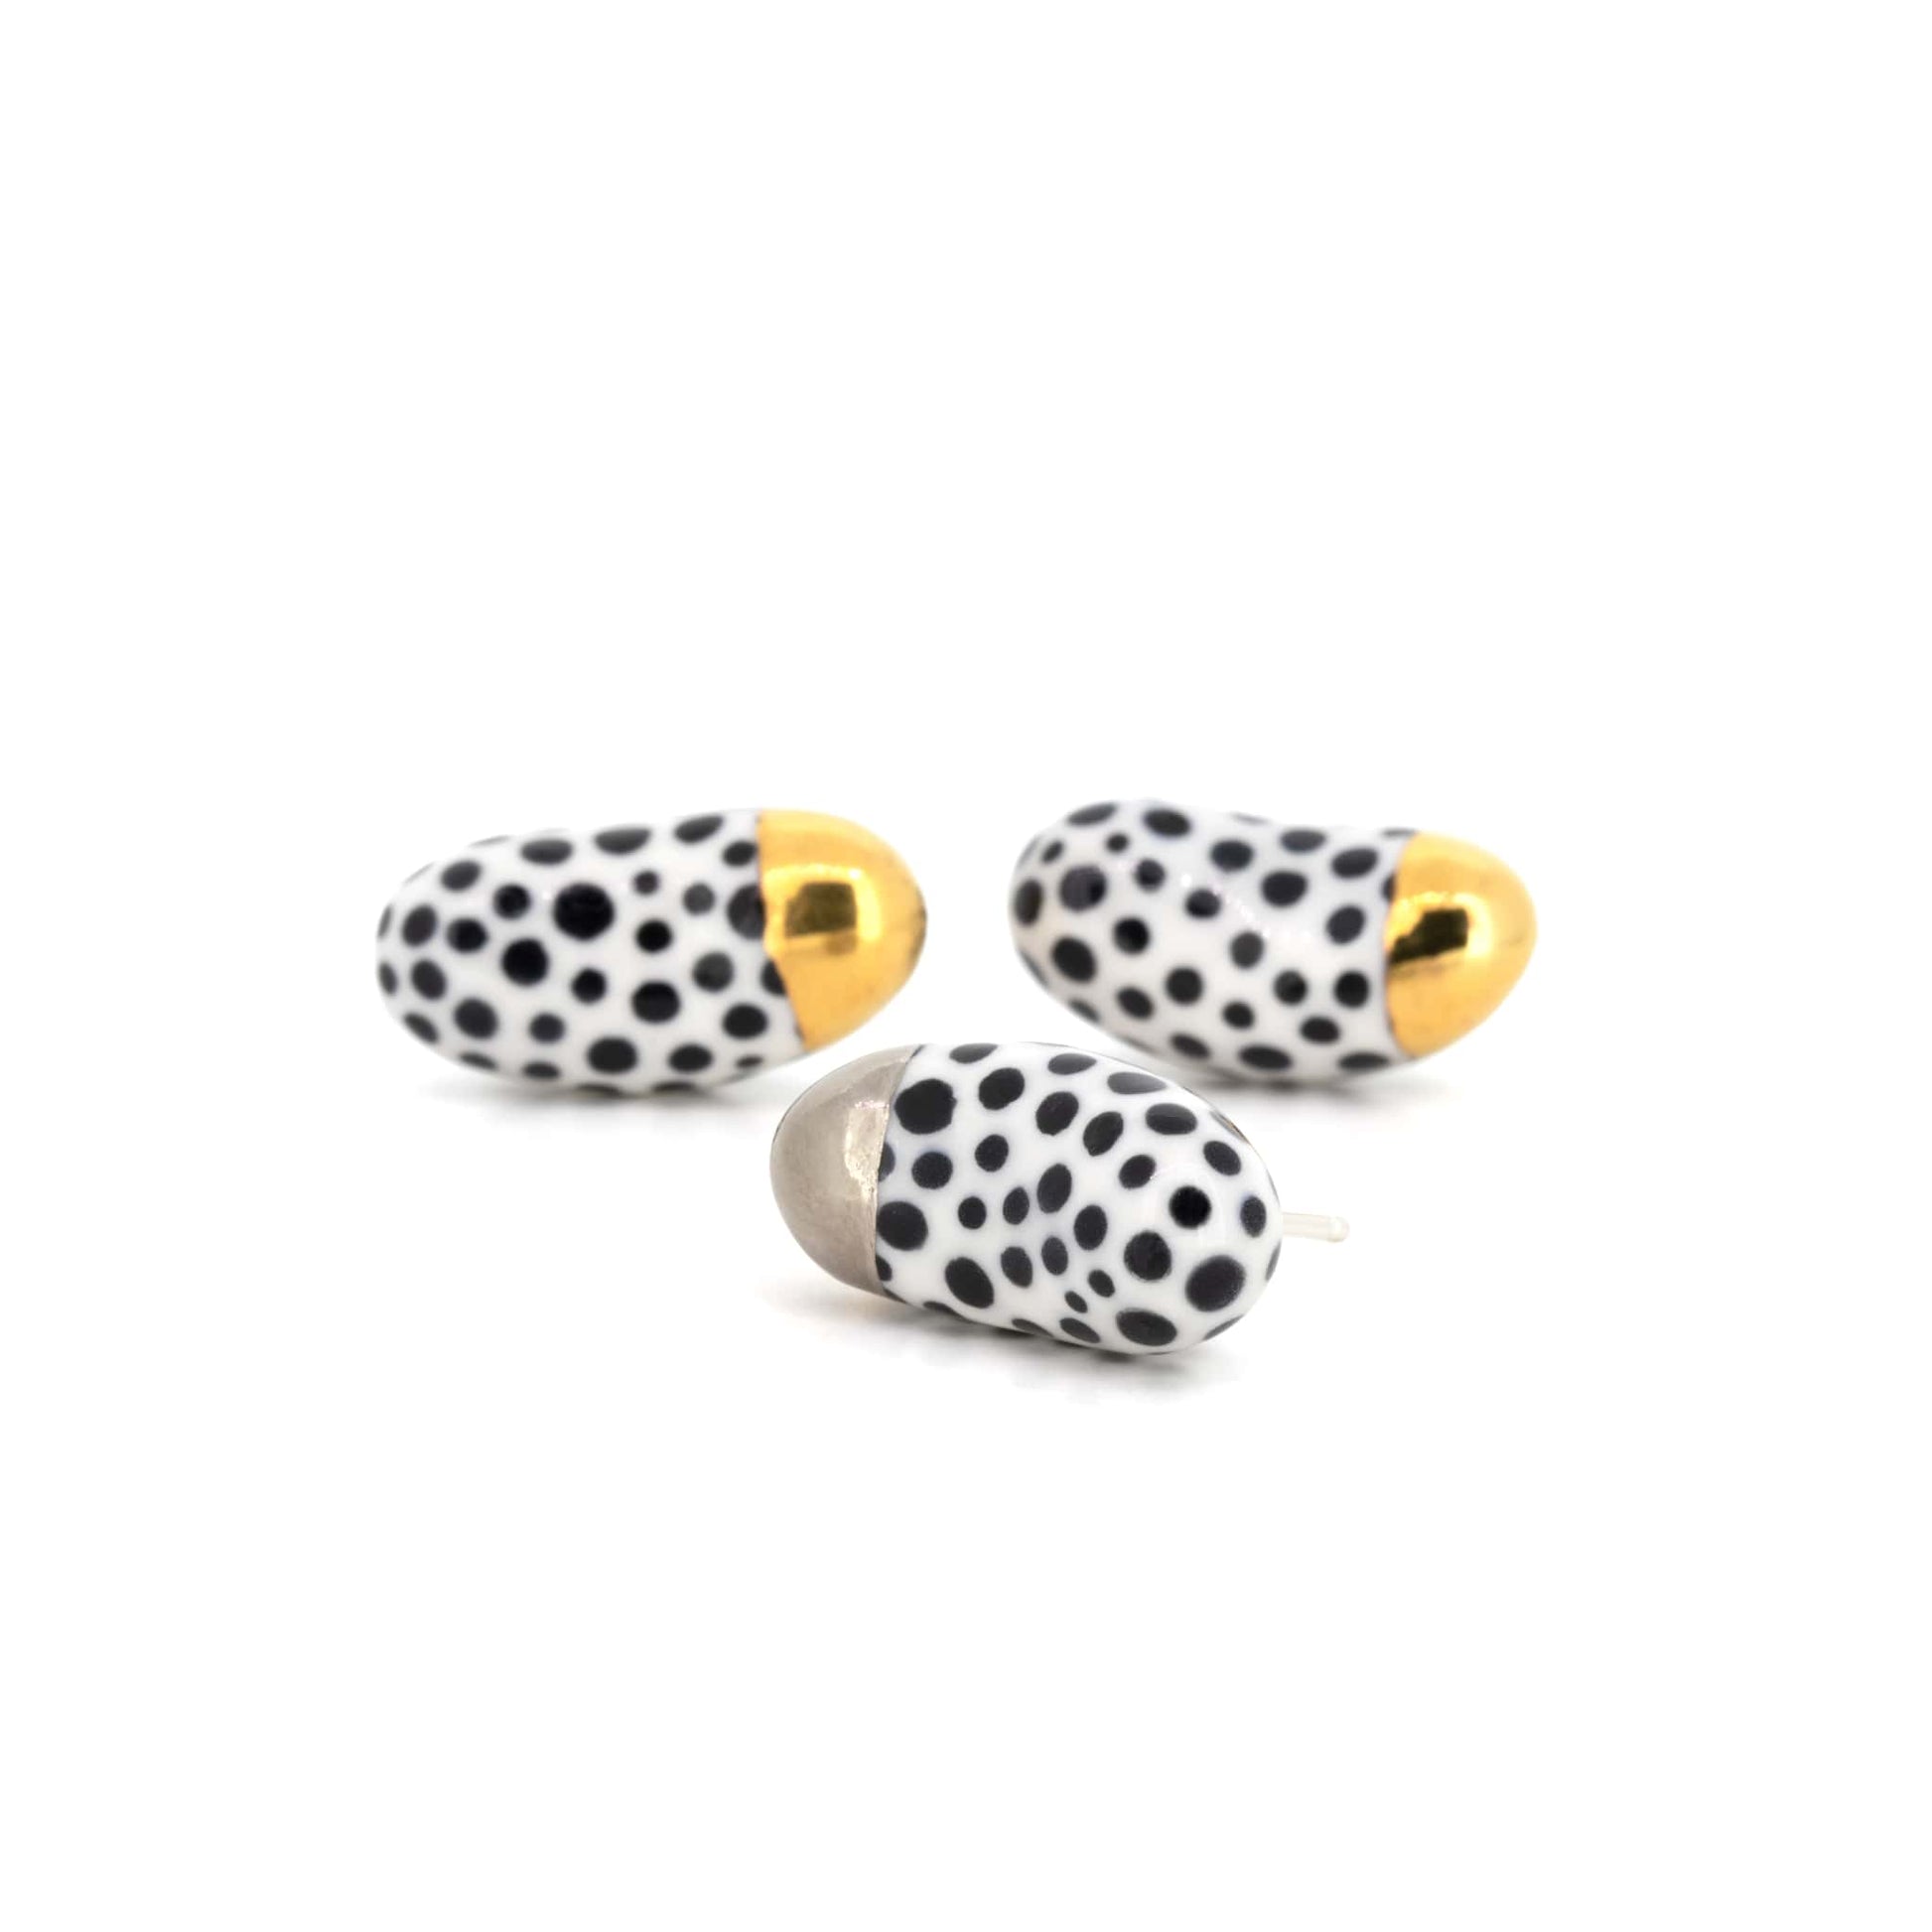 Polka Dot Jelly Bean Earrings With Gold And Platinum